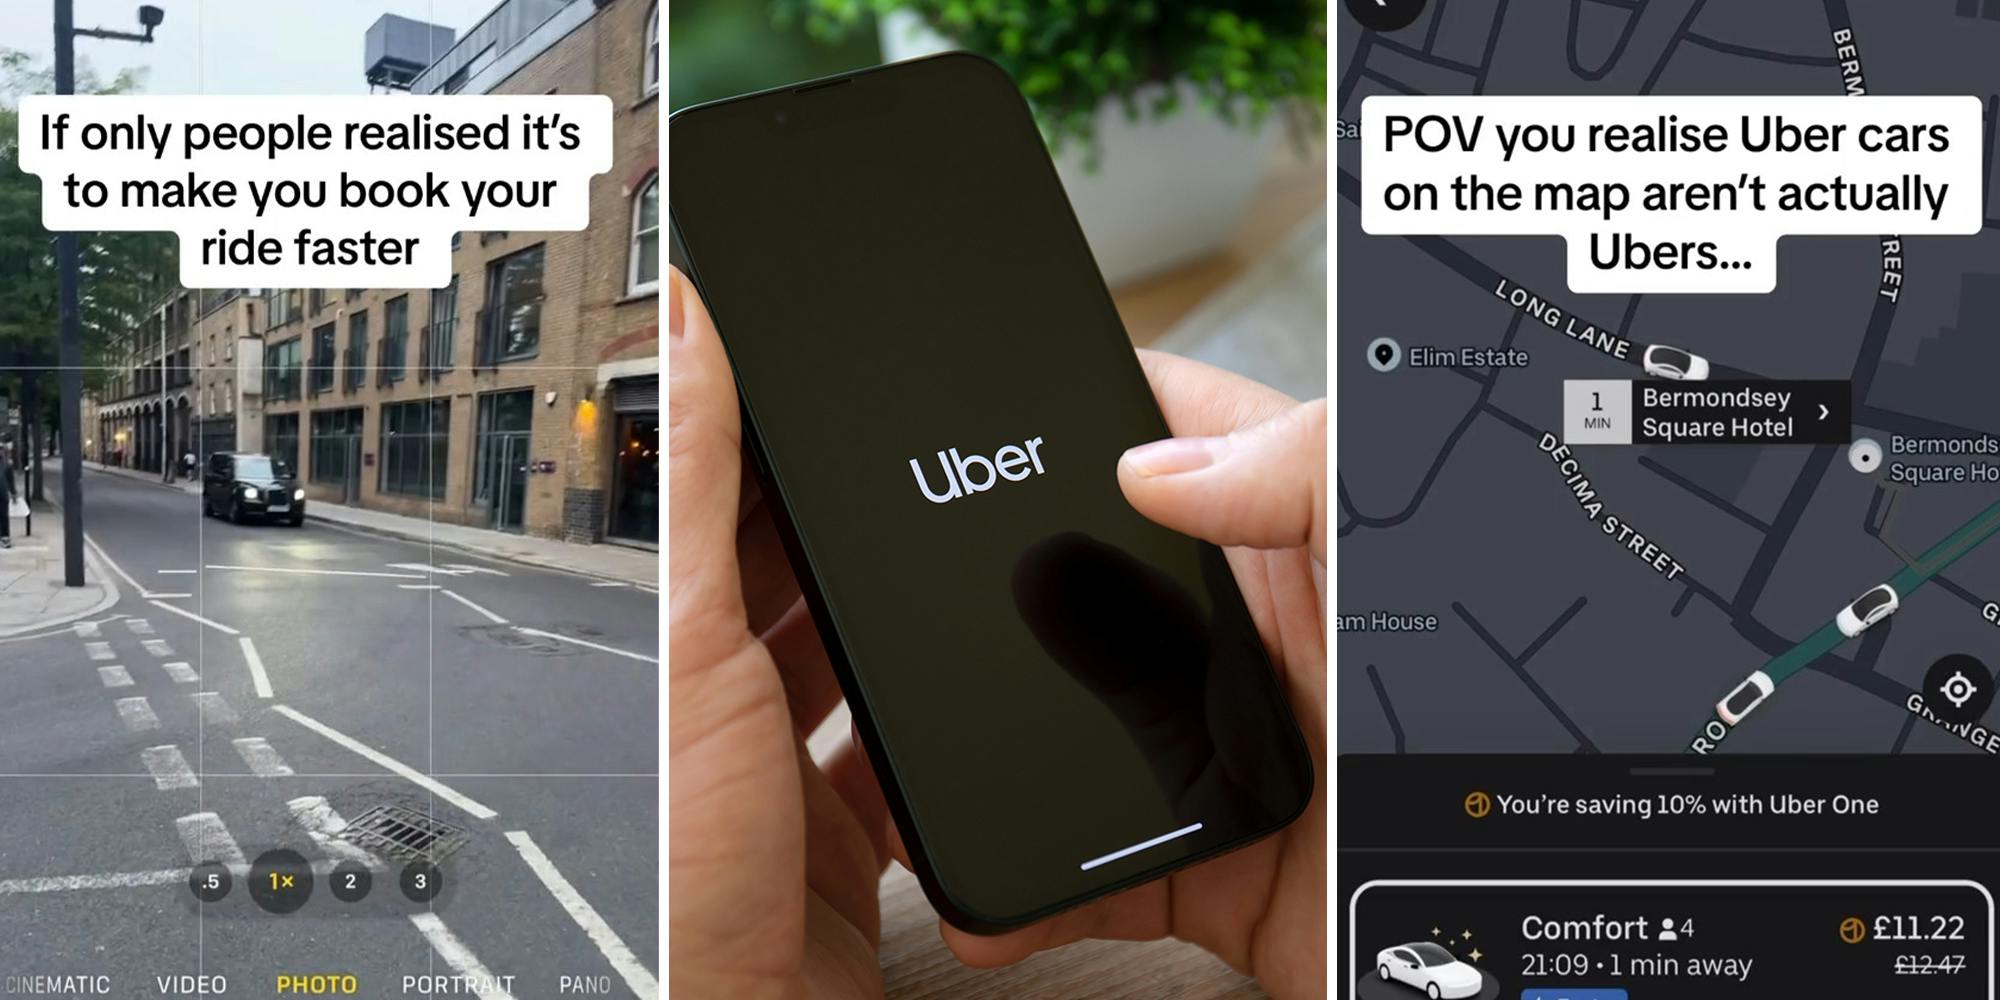 Customer says Uber is 'lying' about the number of available cars on its map